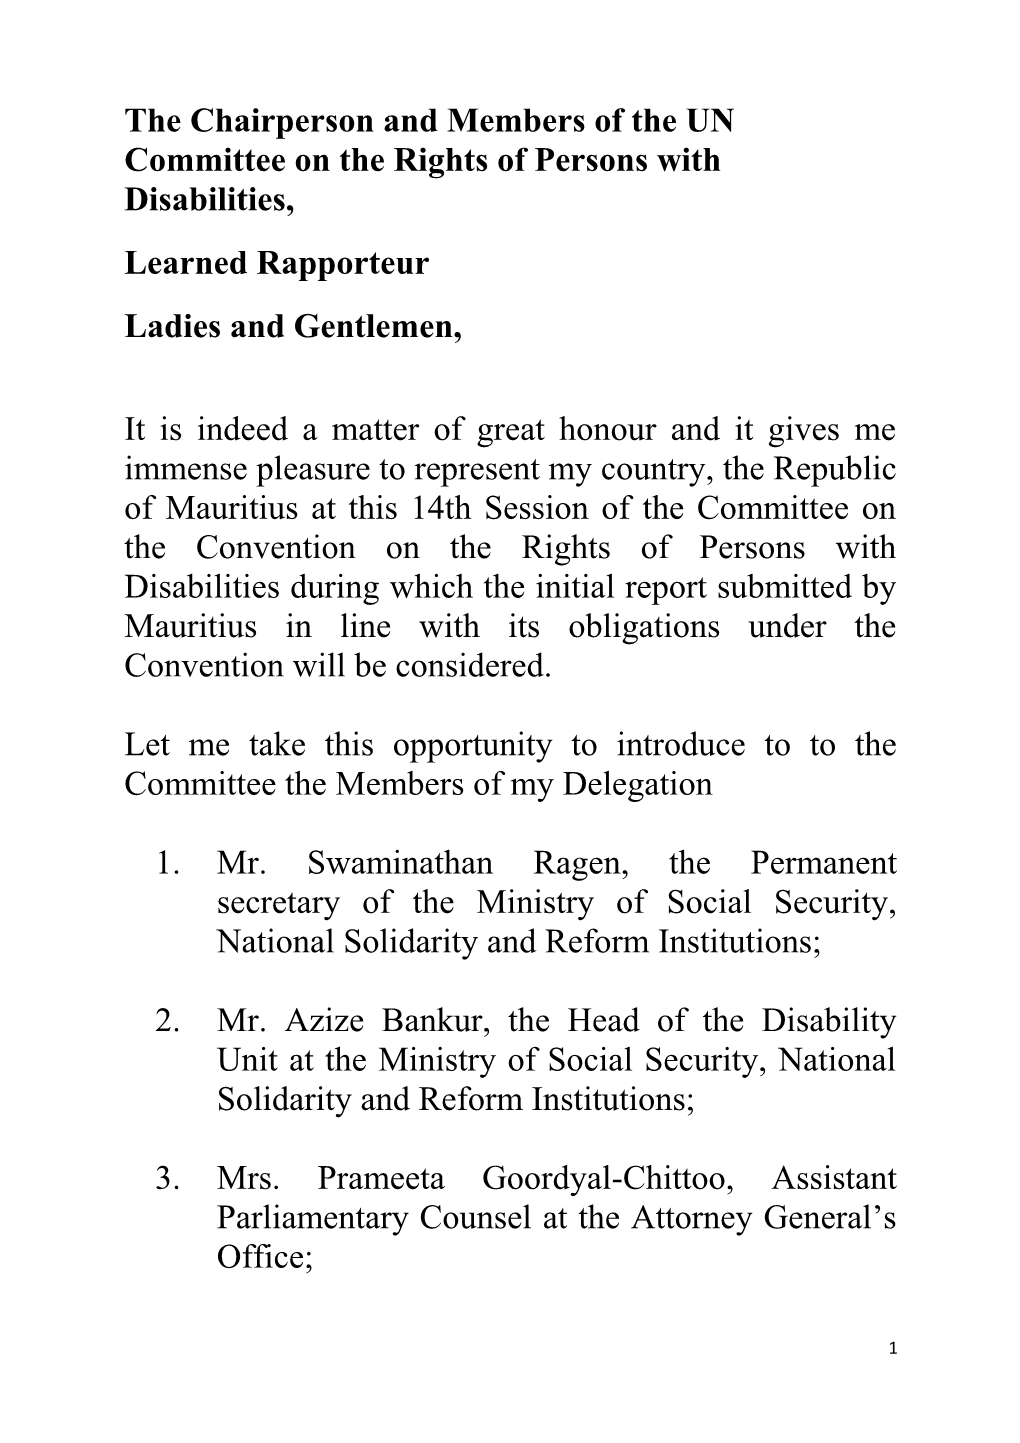 The Chairperson and Members of the UN Committee on the Rights of Persons with Disabilities